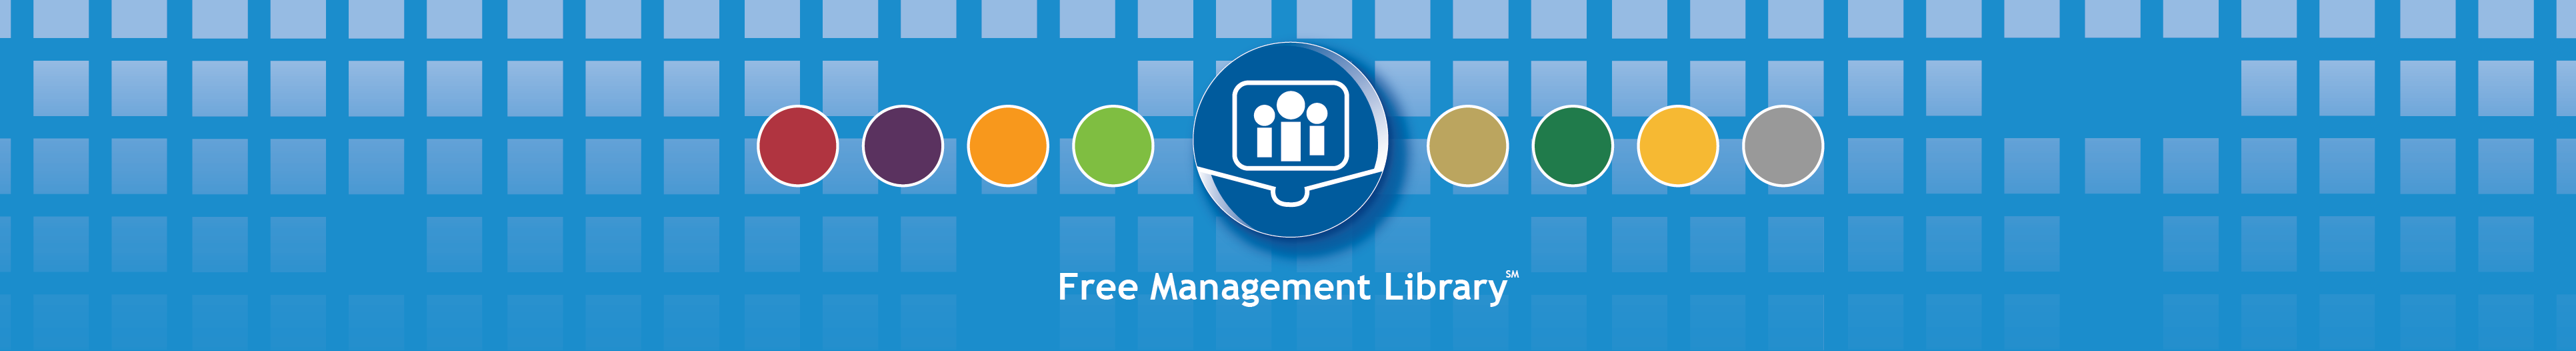 Free Management Library